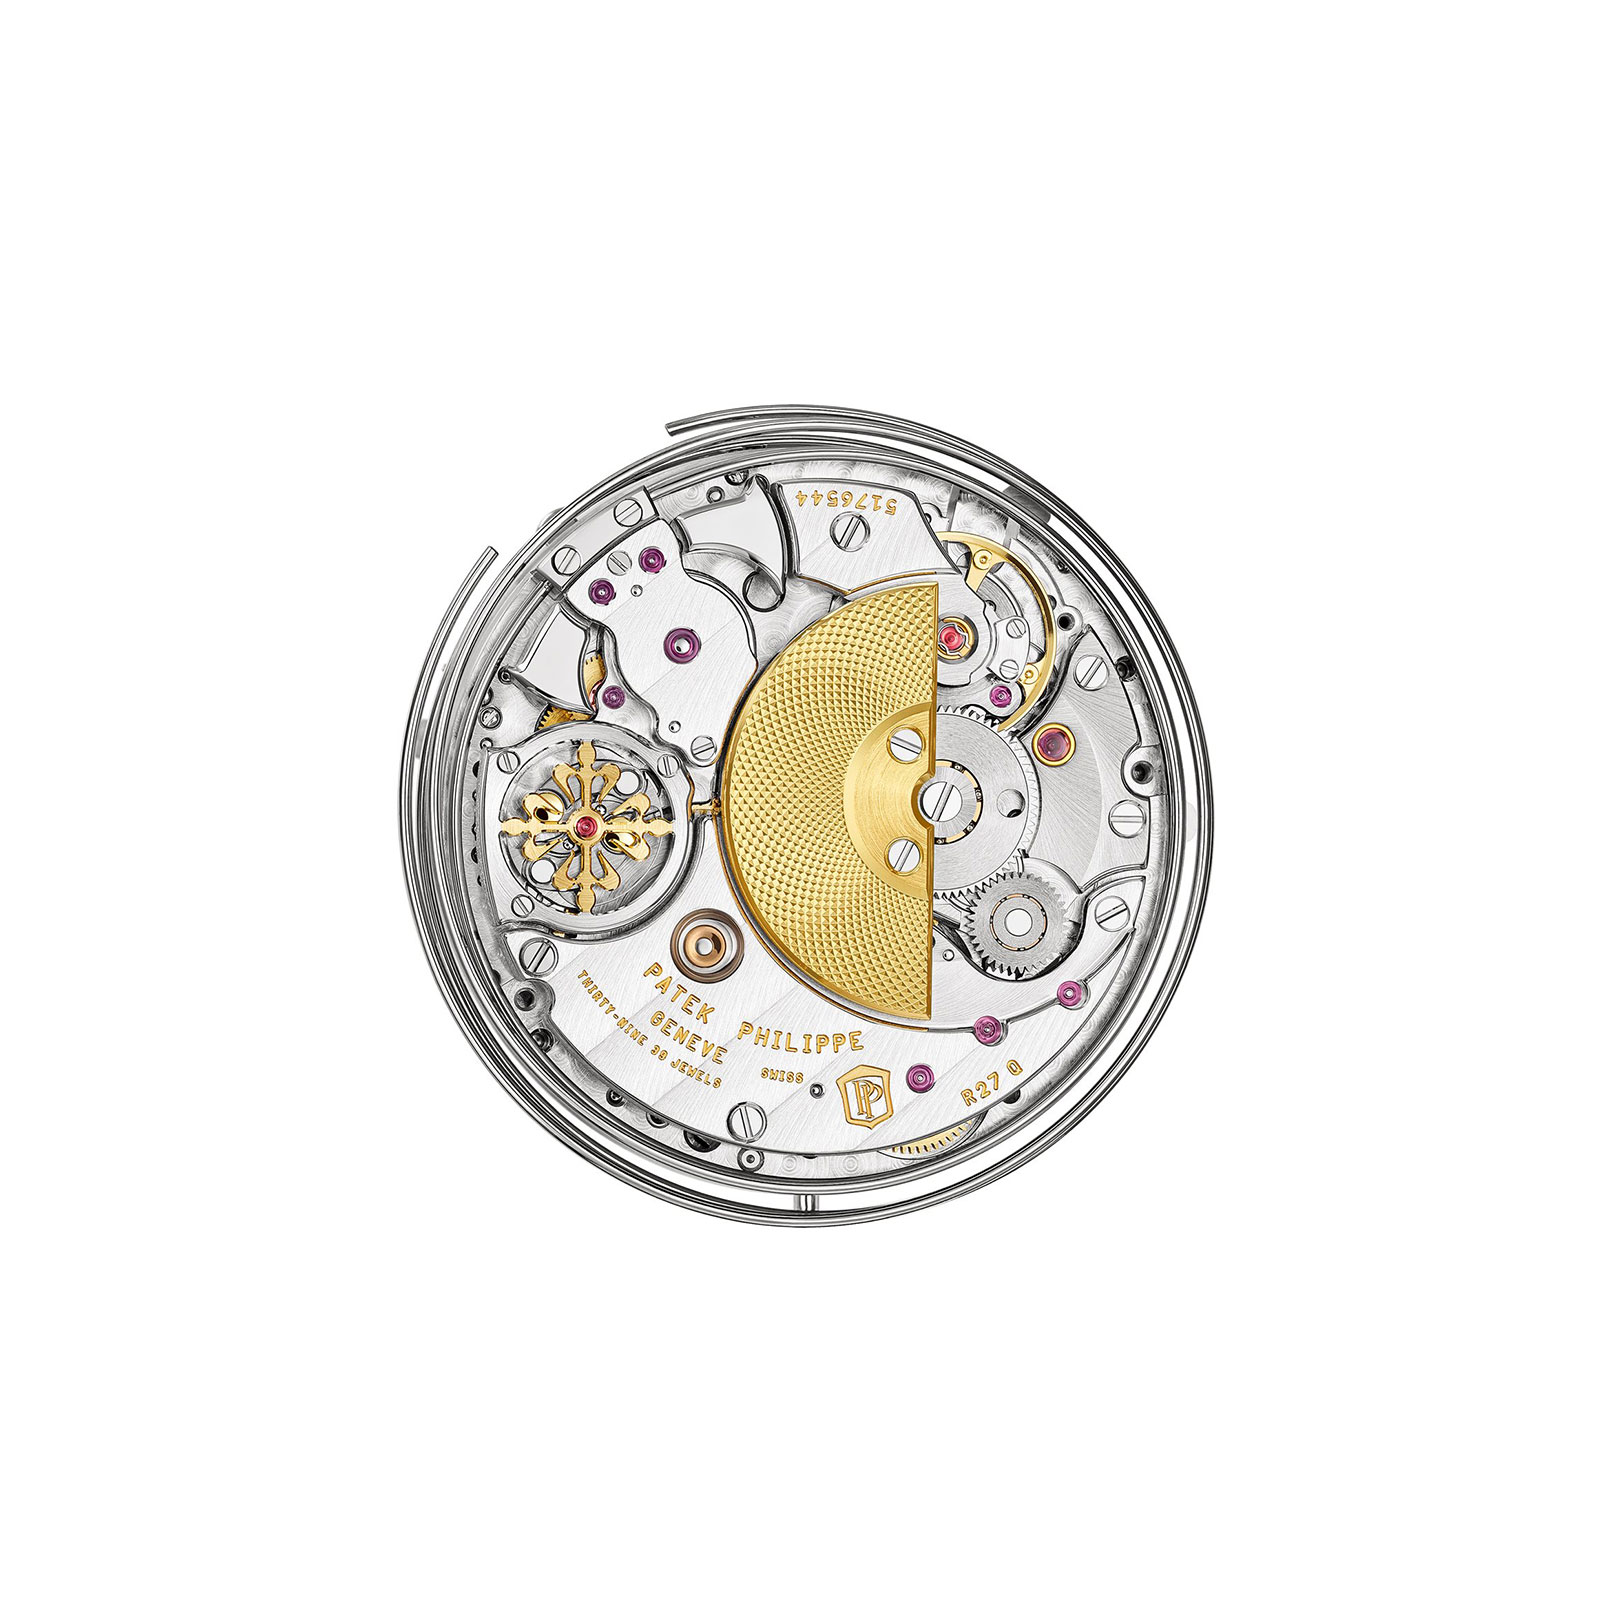 Grand Complications Minute Repeater gallery 6